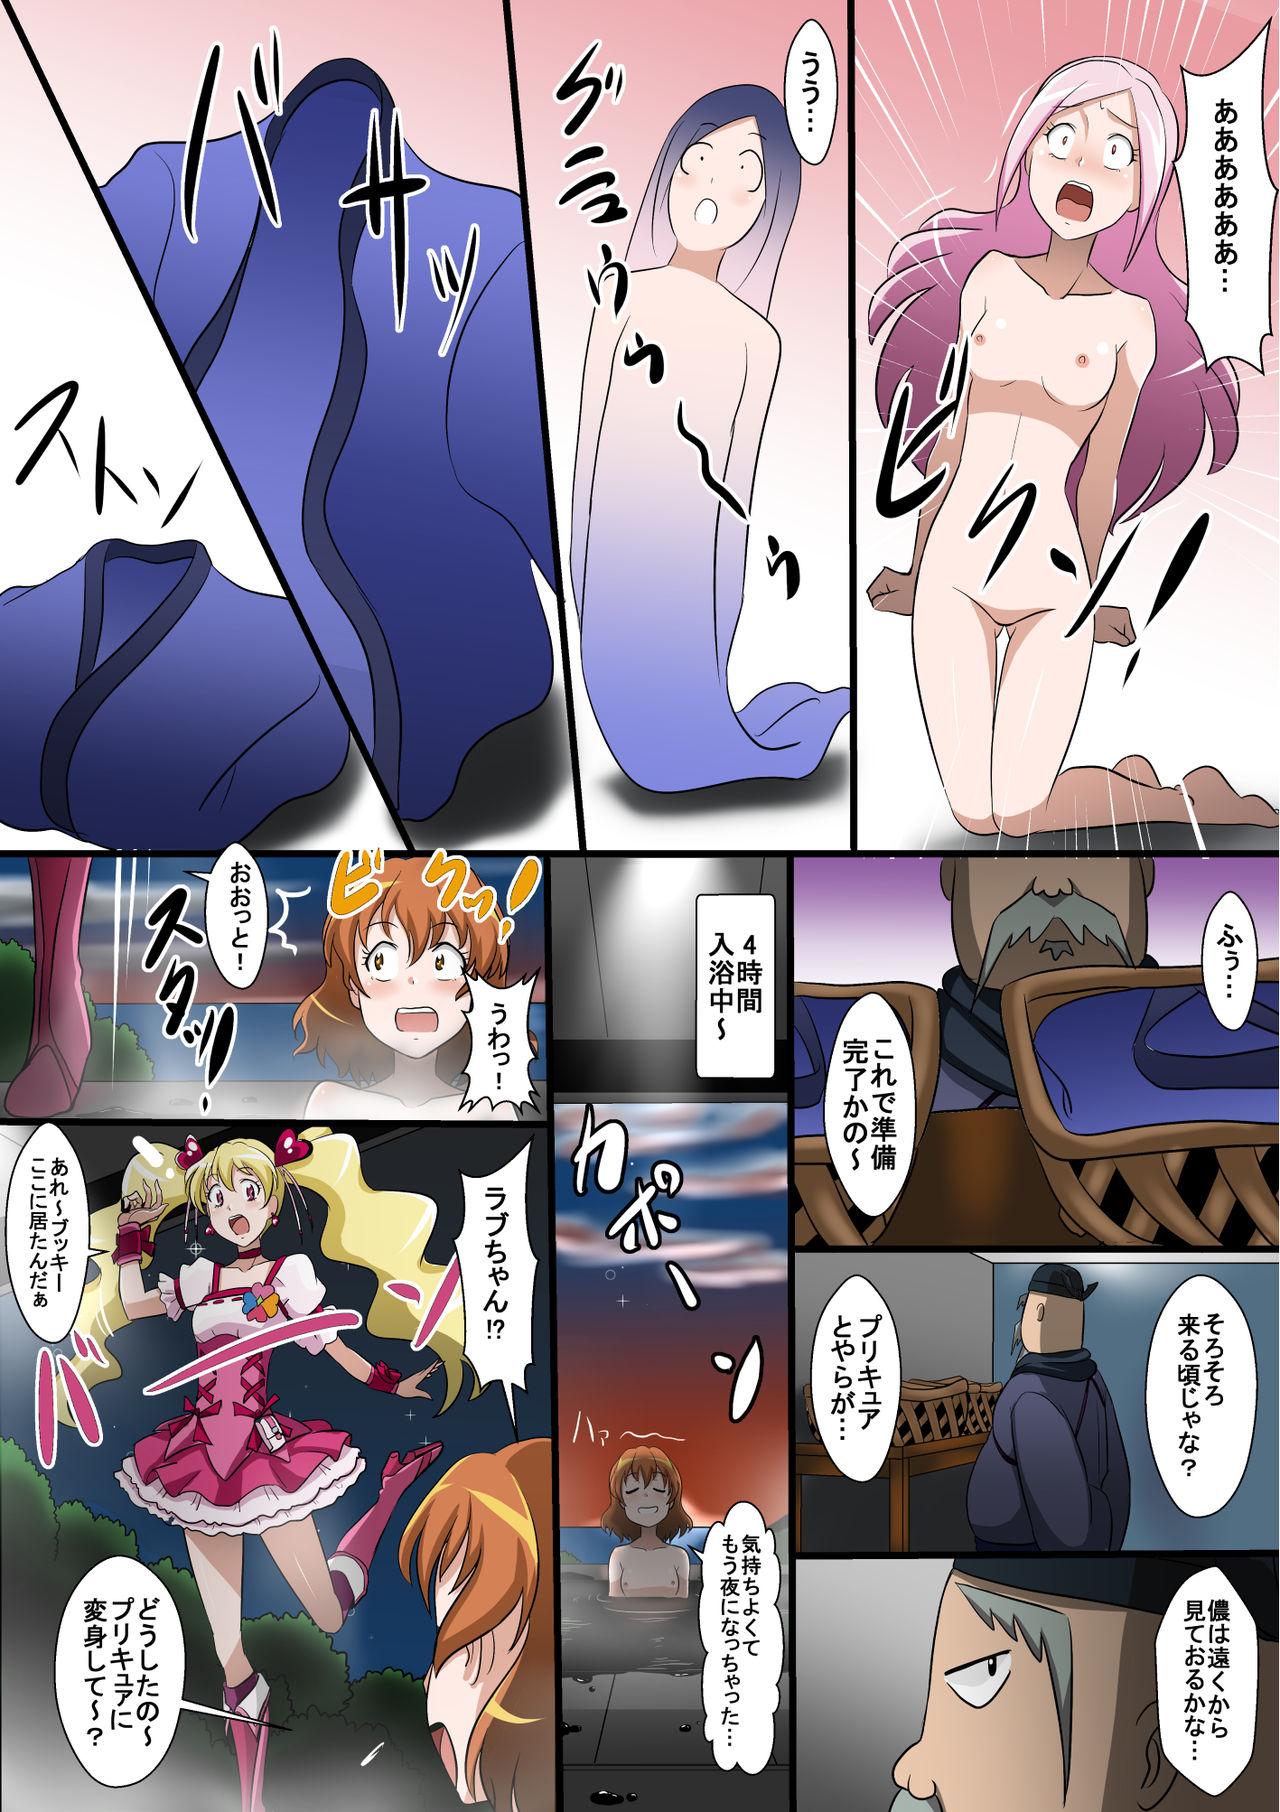 Femdom Clips shinenkan Comic of Textile-ification - Fresh precure Shemale Sex - Page 7